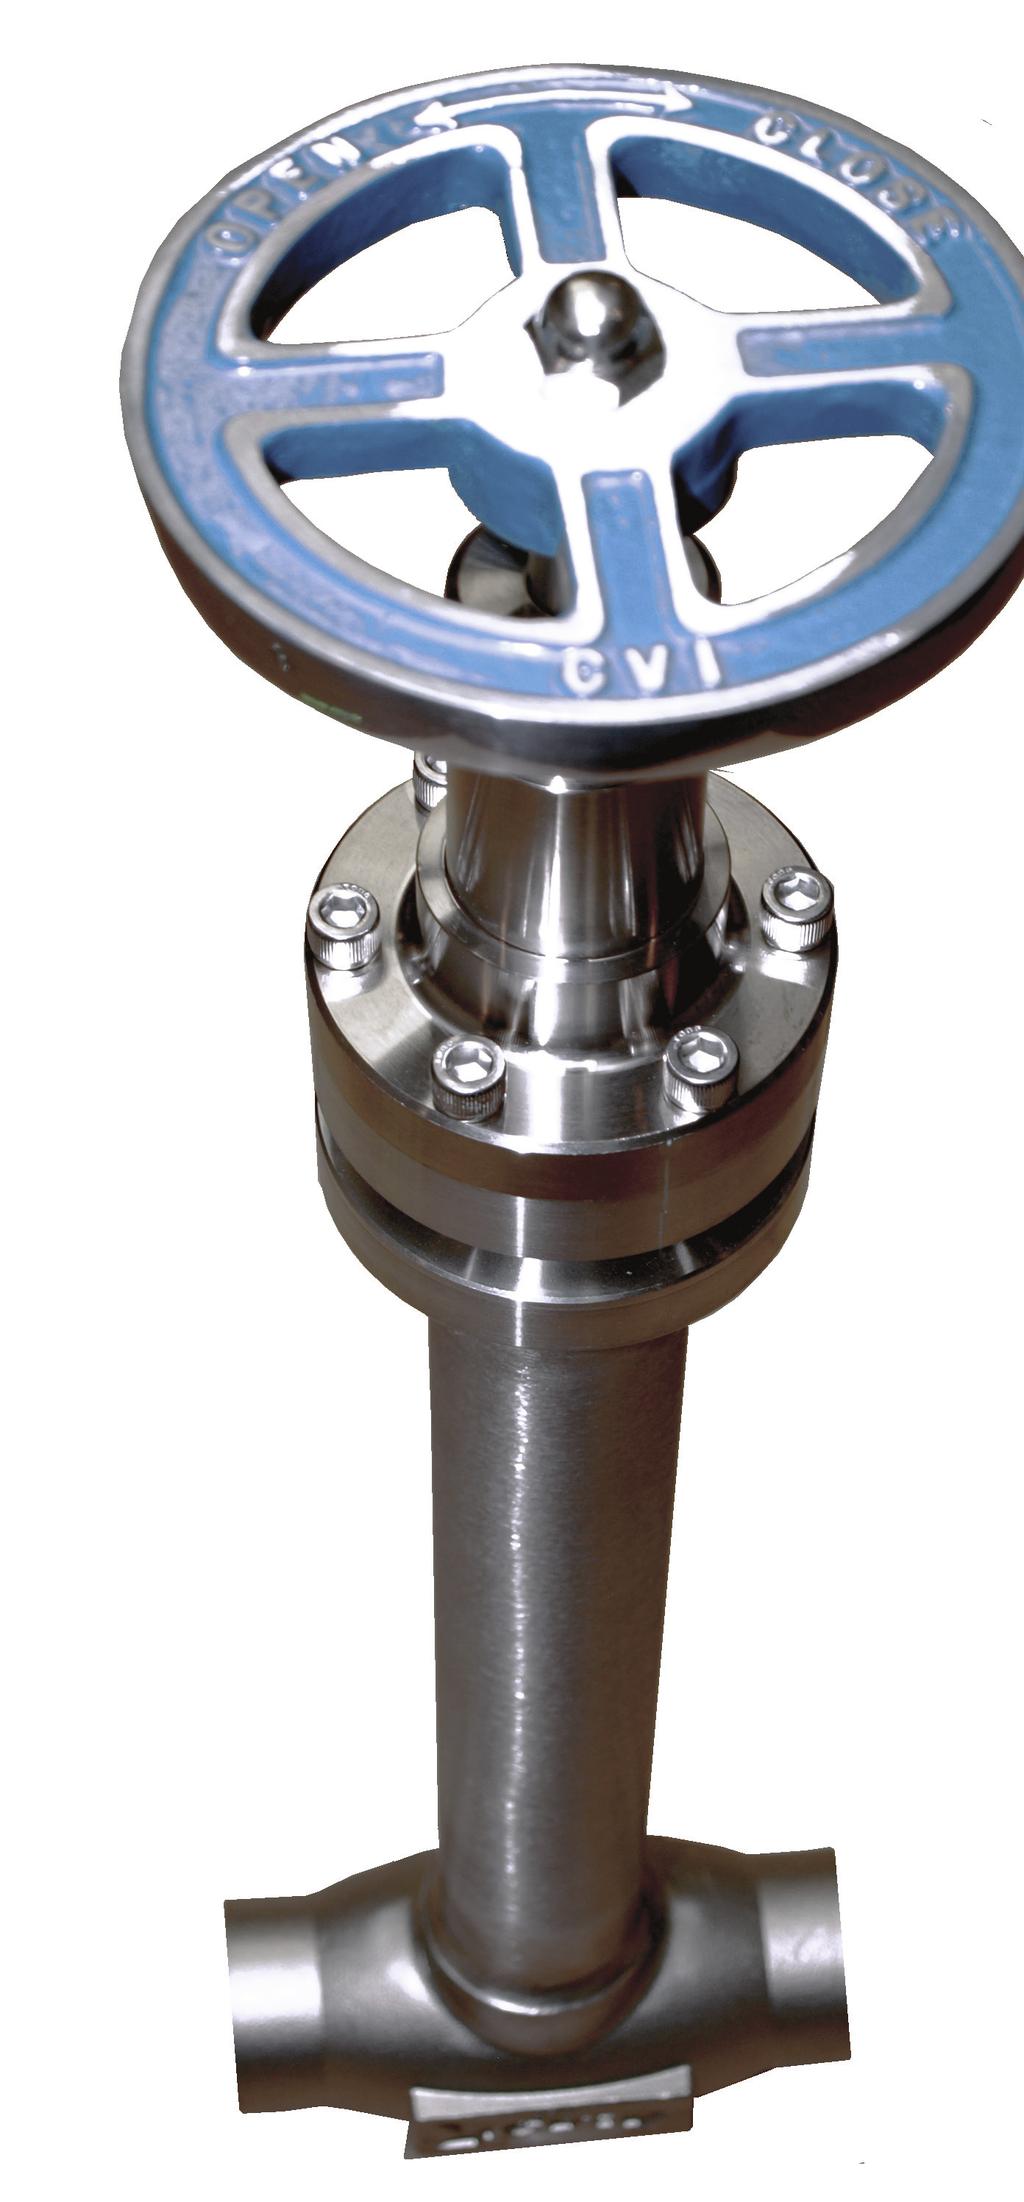 The CVI Cryogenic Valve delivers precise performance, long life, and exceptional reliability ensuring your process or facility s operation and safety, while minimizing downtime.